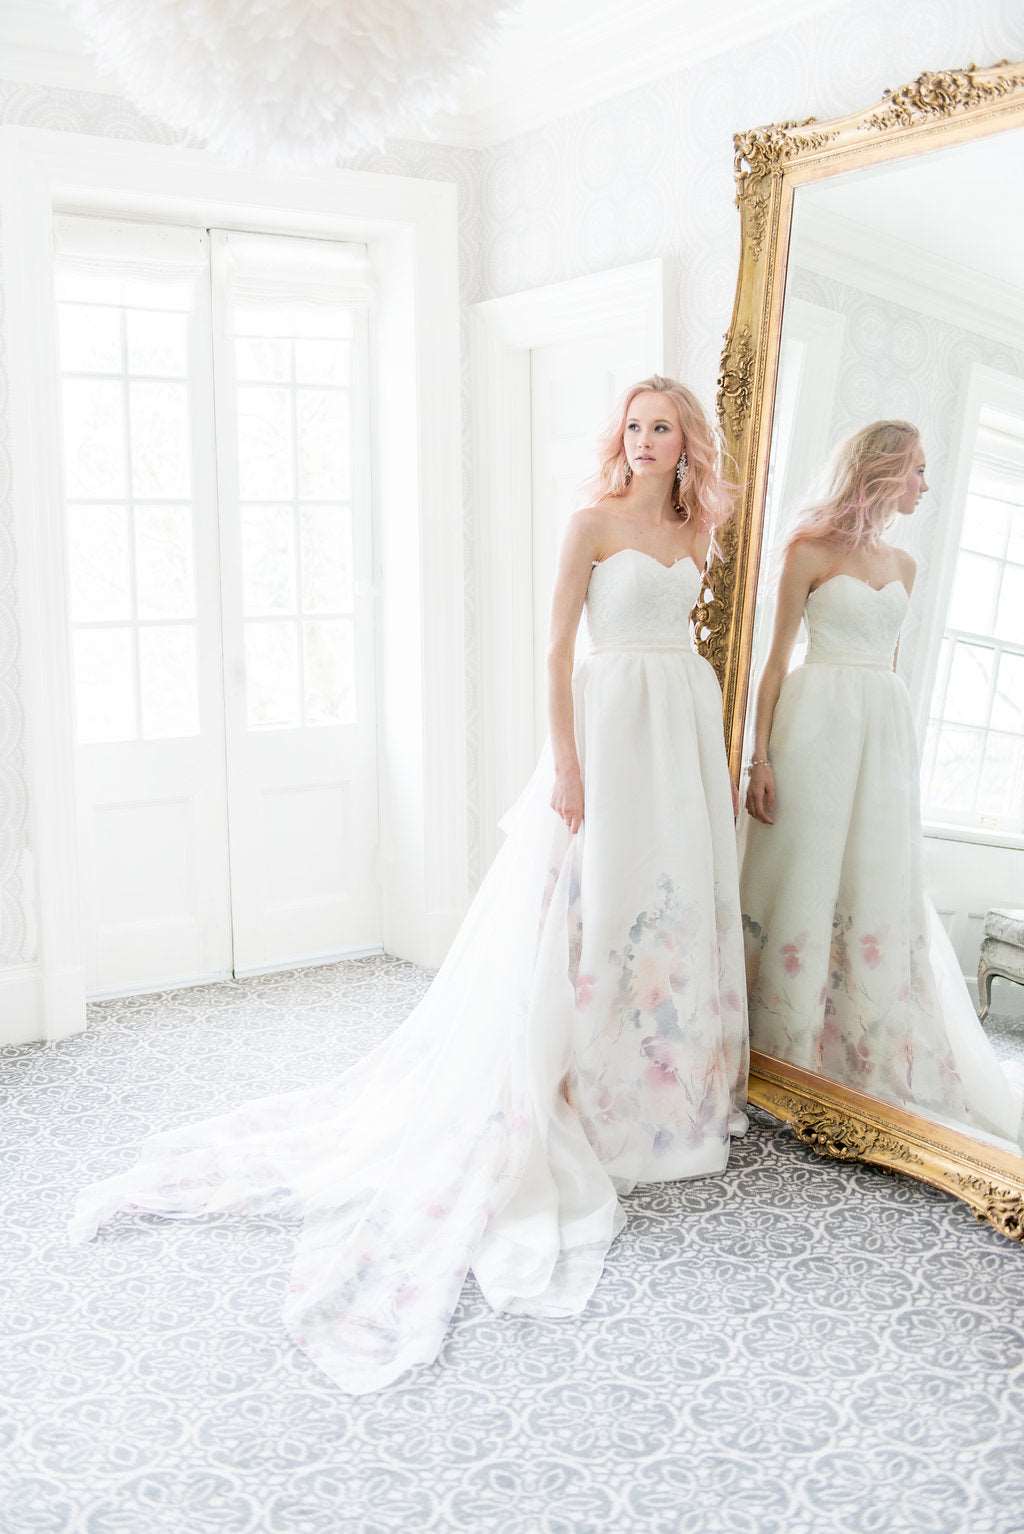 Delphine, a garden inspired pastel wedding dress in printed organza. Designed and handmade by Catherine Langlois in Toronto, Ontario, Canada.